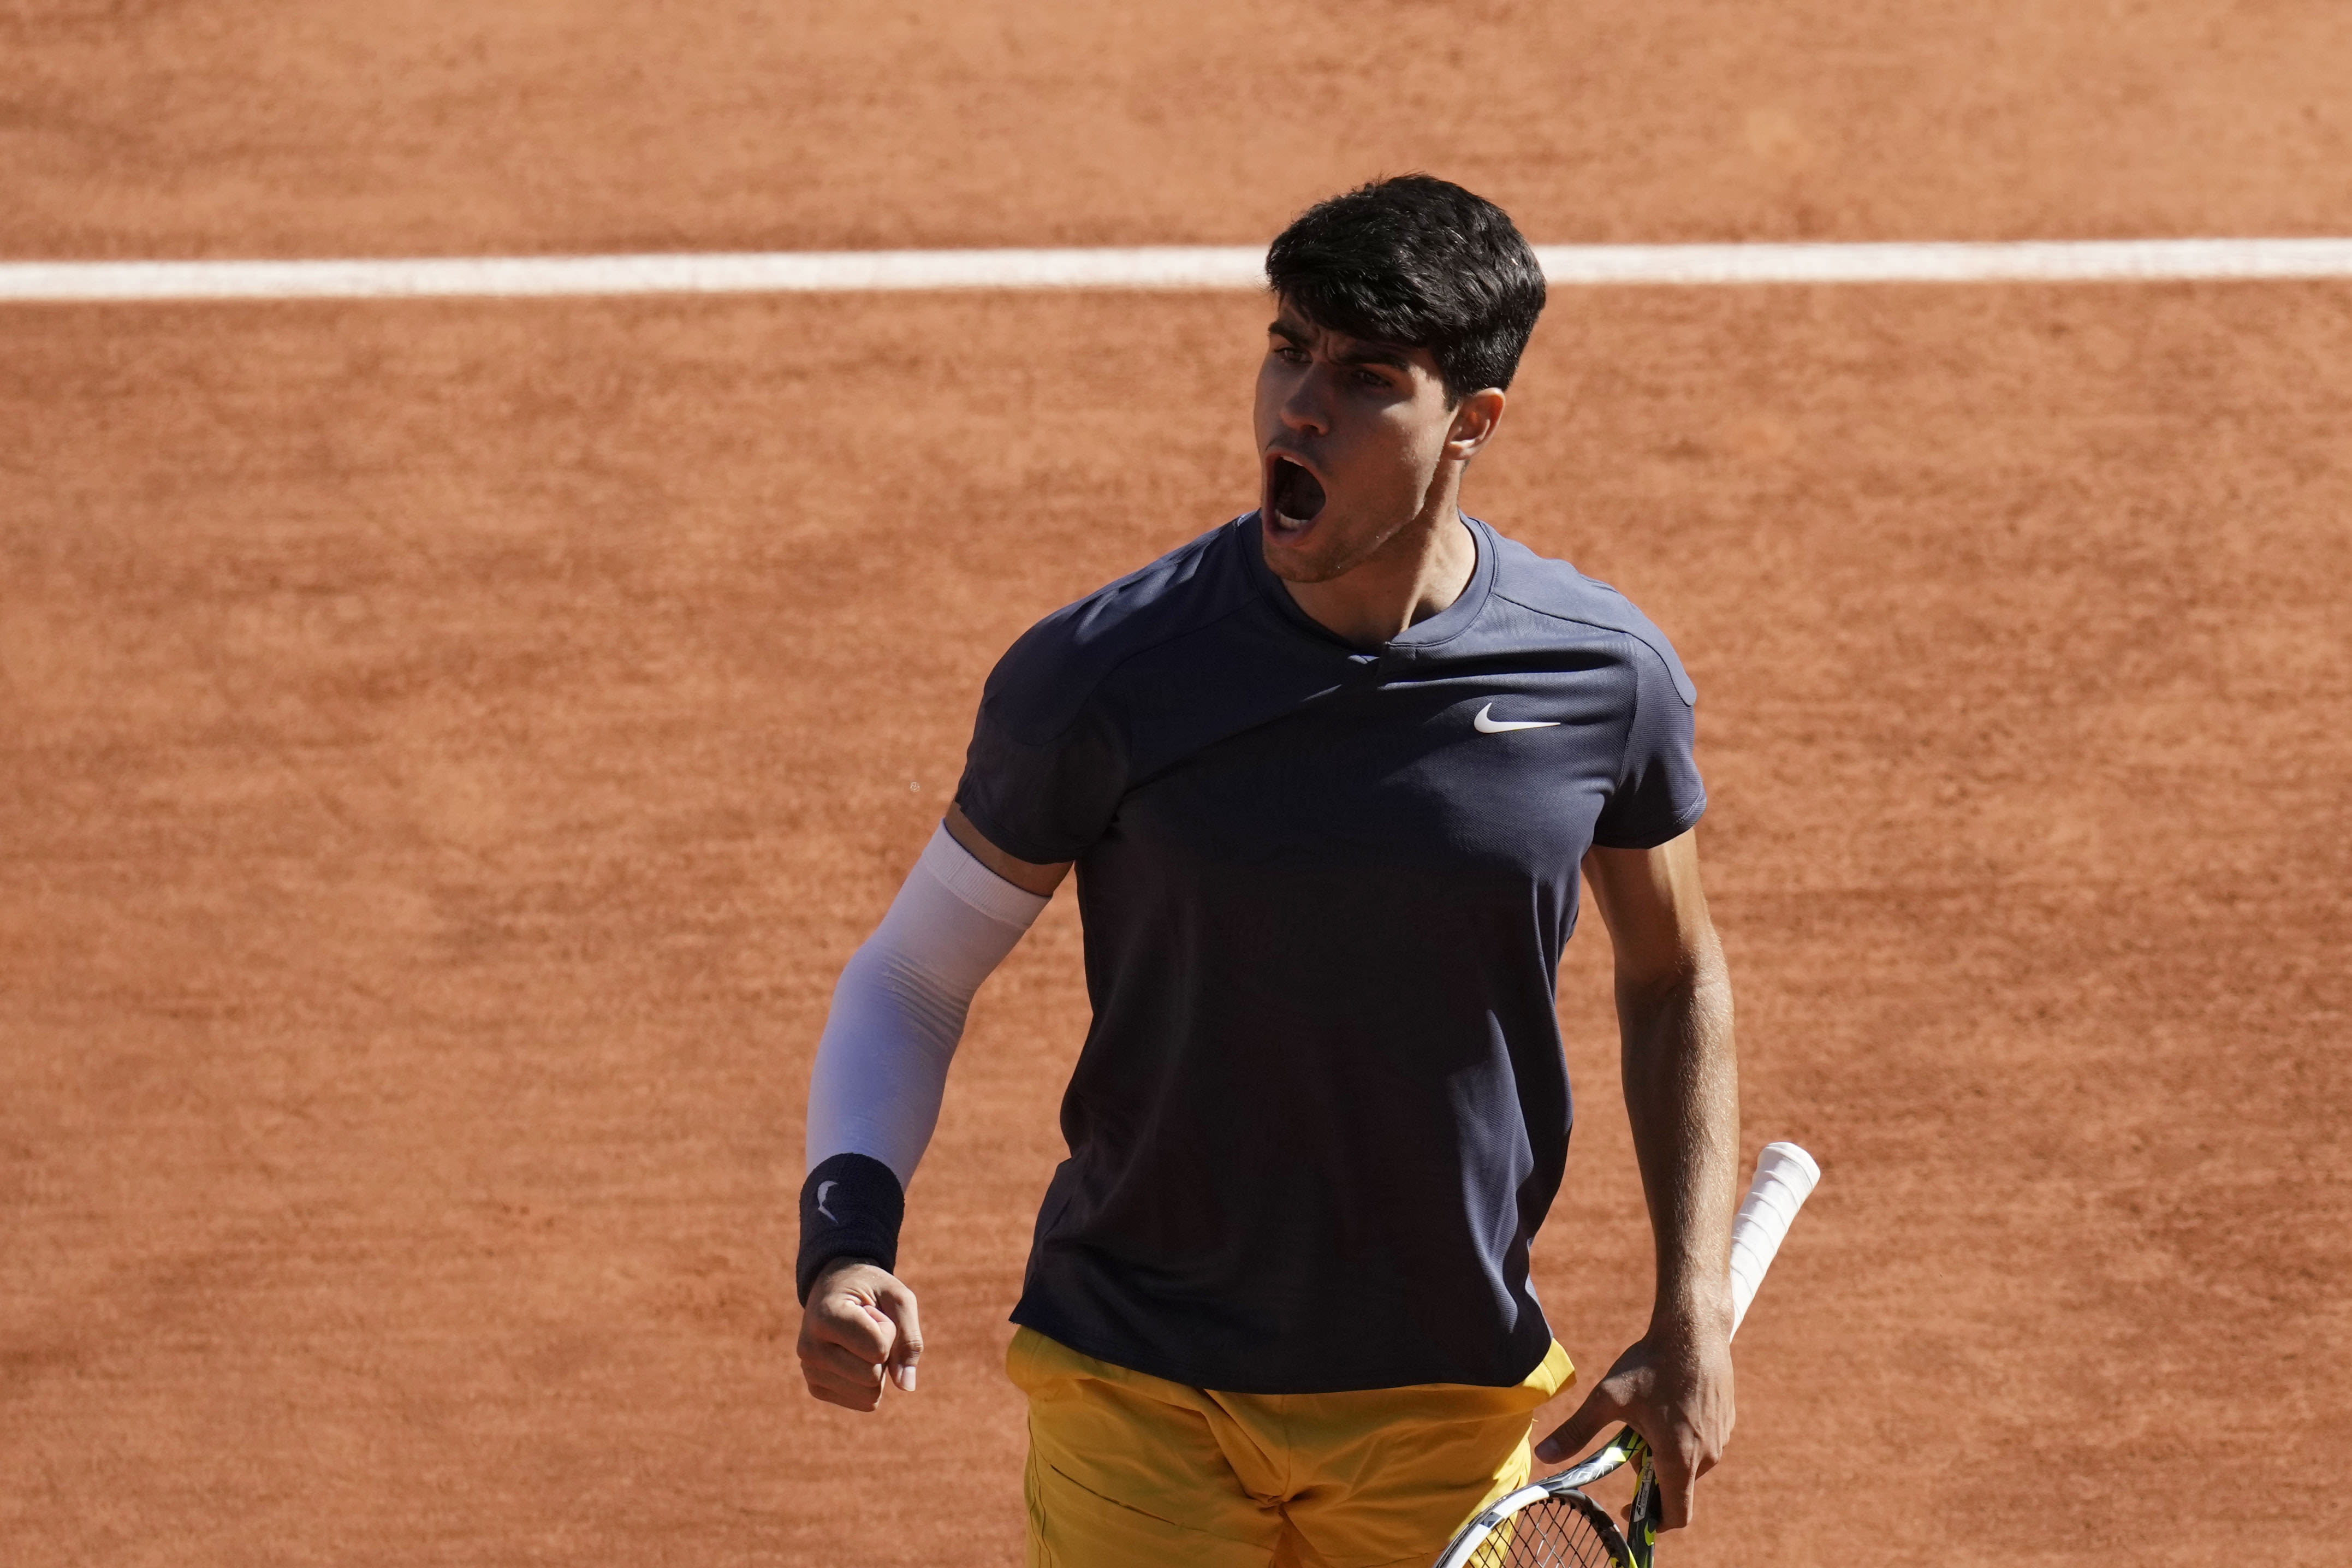 Carlos Alcaraz reaches his first French Open final by beating Jannik Sinner 2-6, 6-3, 3-6, 6-4, 6-3